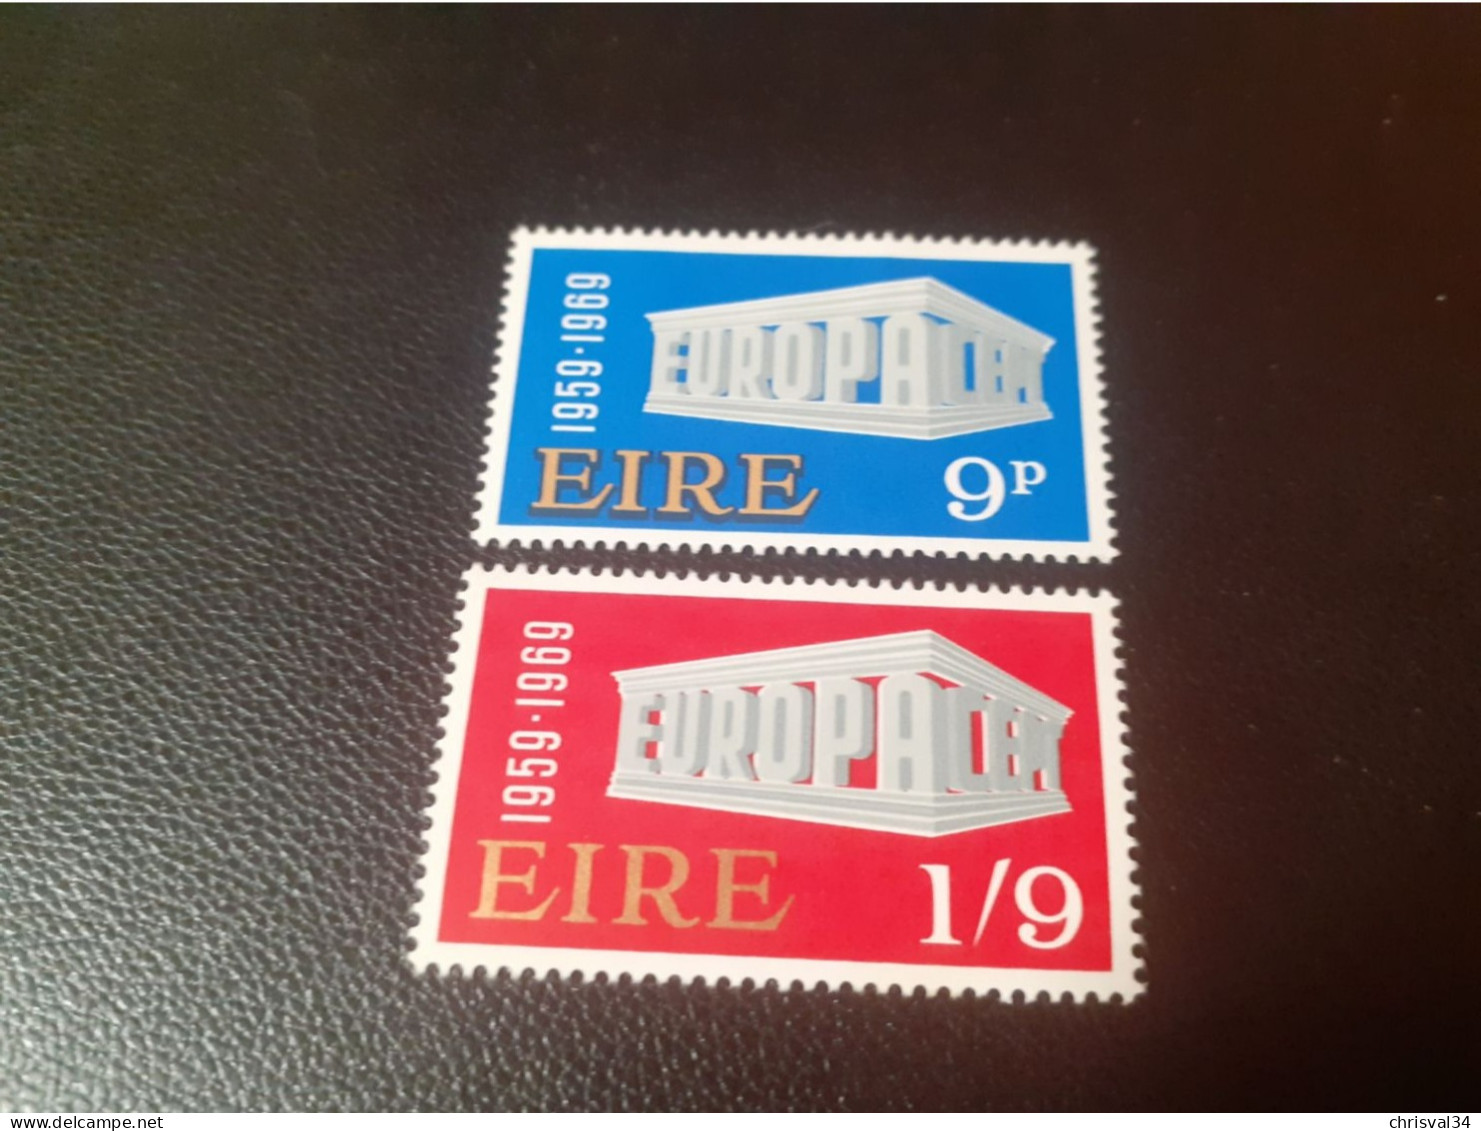 TIMBRES   IRLANDE  ANNEE 1969   N  232 / 233   COTE  5,00  EUROS   NEUFS  LUXE** - Nuevos